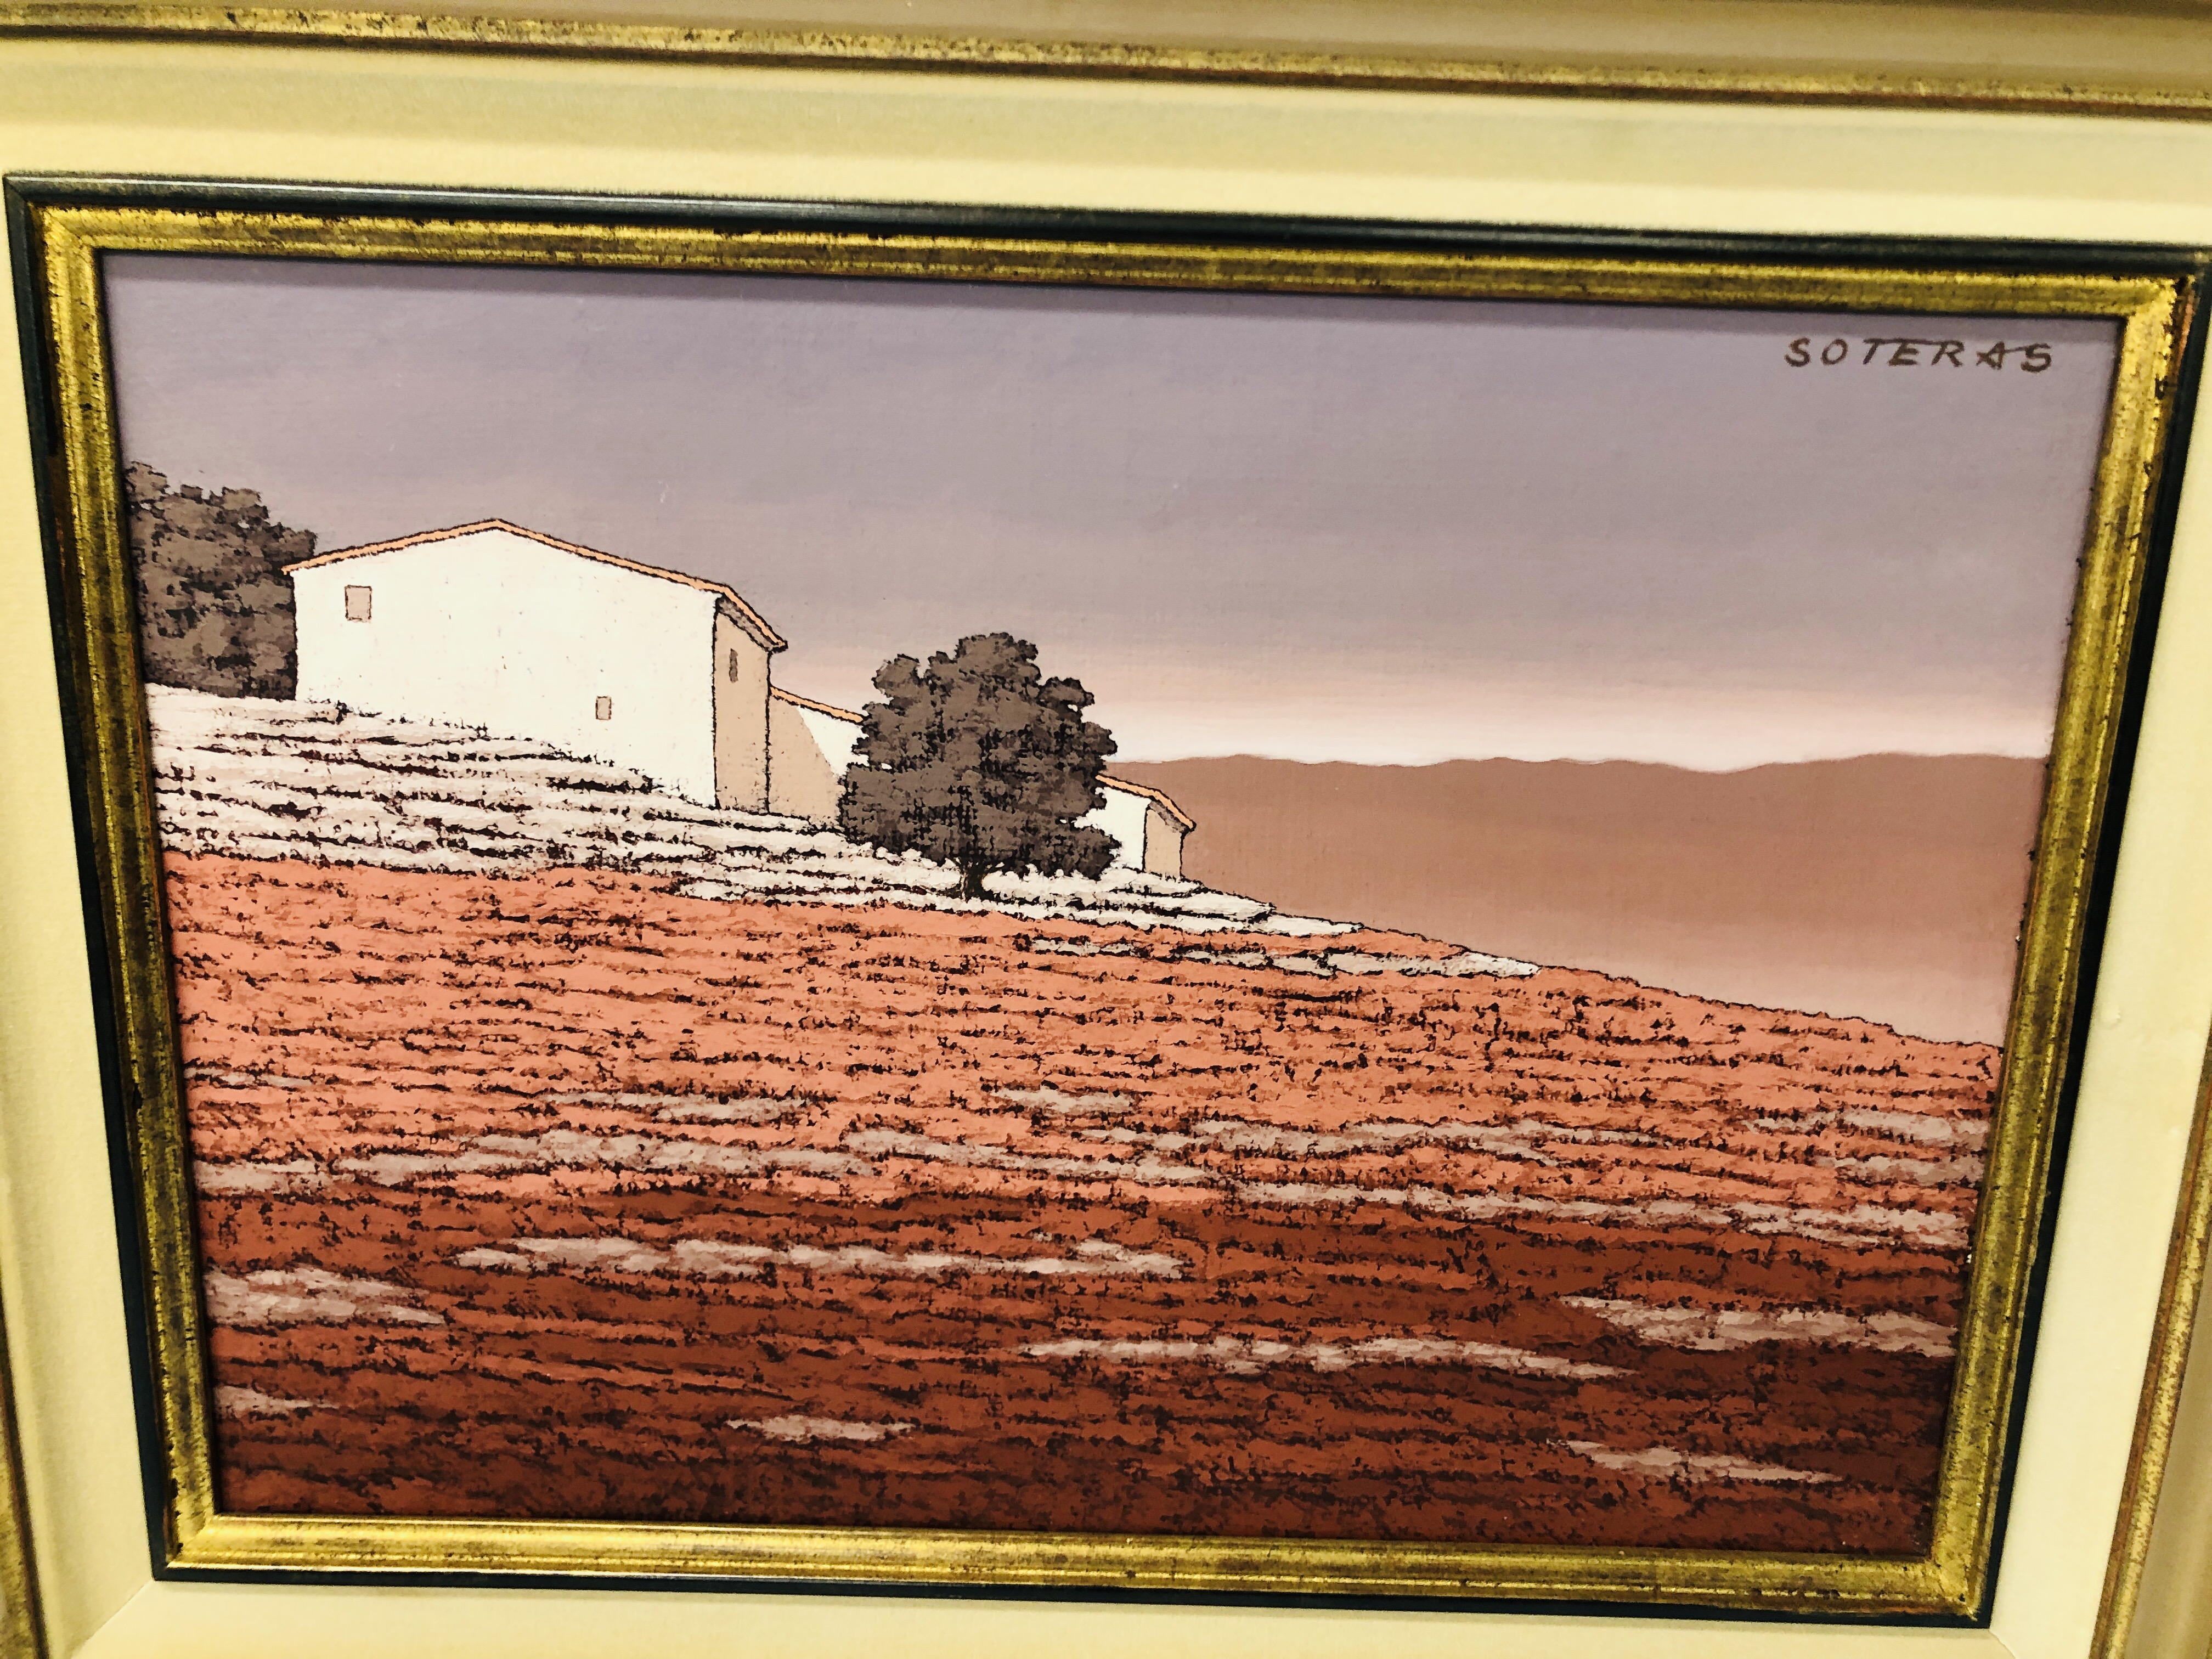 OIL ON CANVAS SPANISH HOUSE ON A HILL FRAMED AND MOUNTED BEARING SIGNATURE JORGE SORTERAS 44. - Bild 2 aus 4